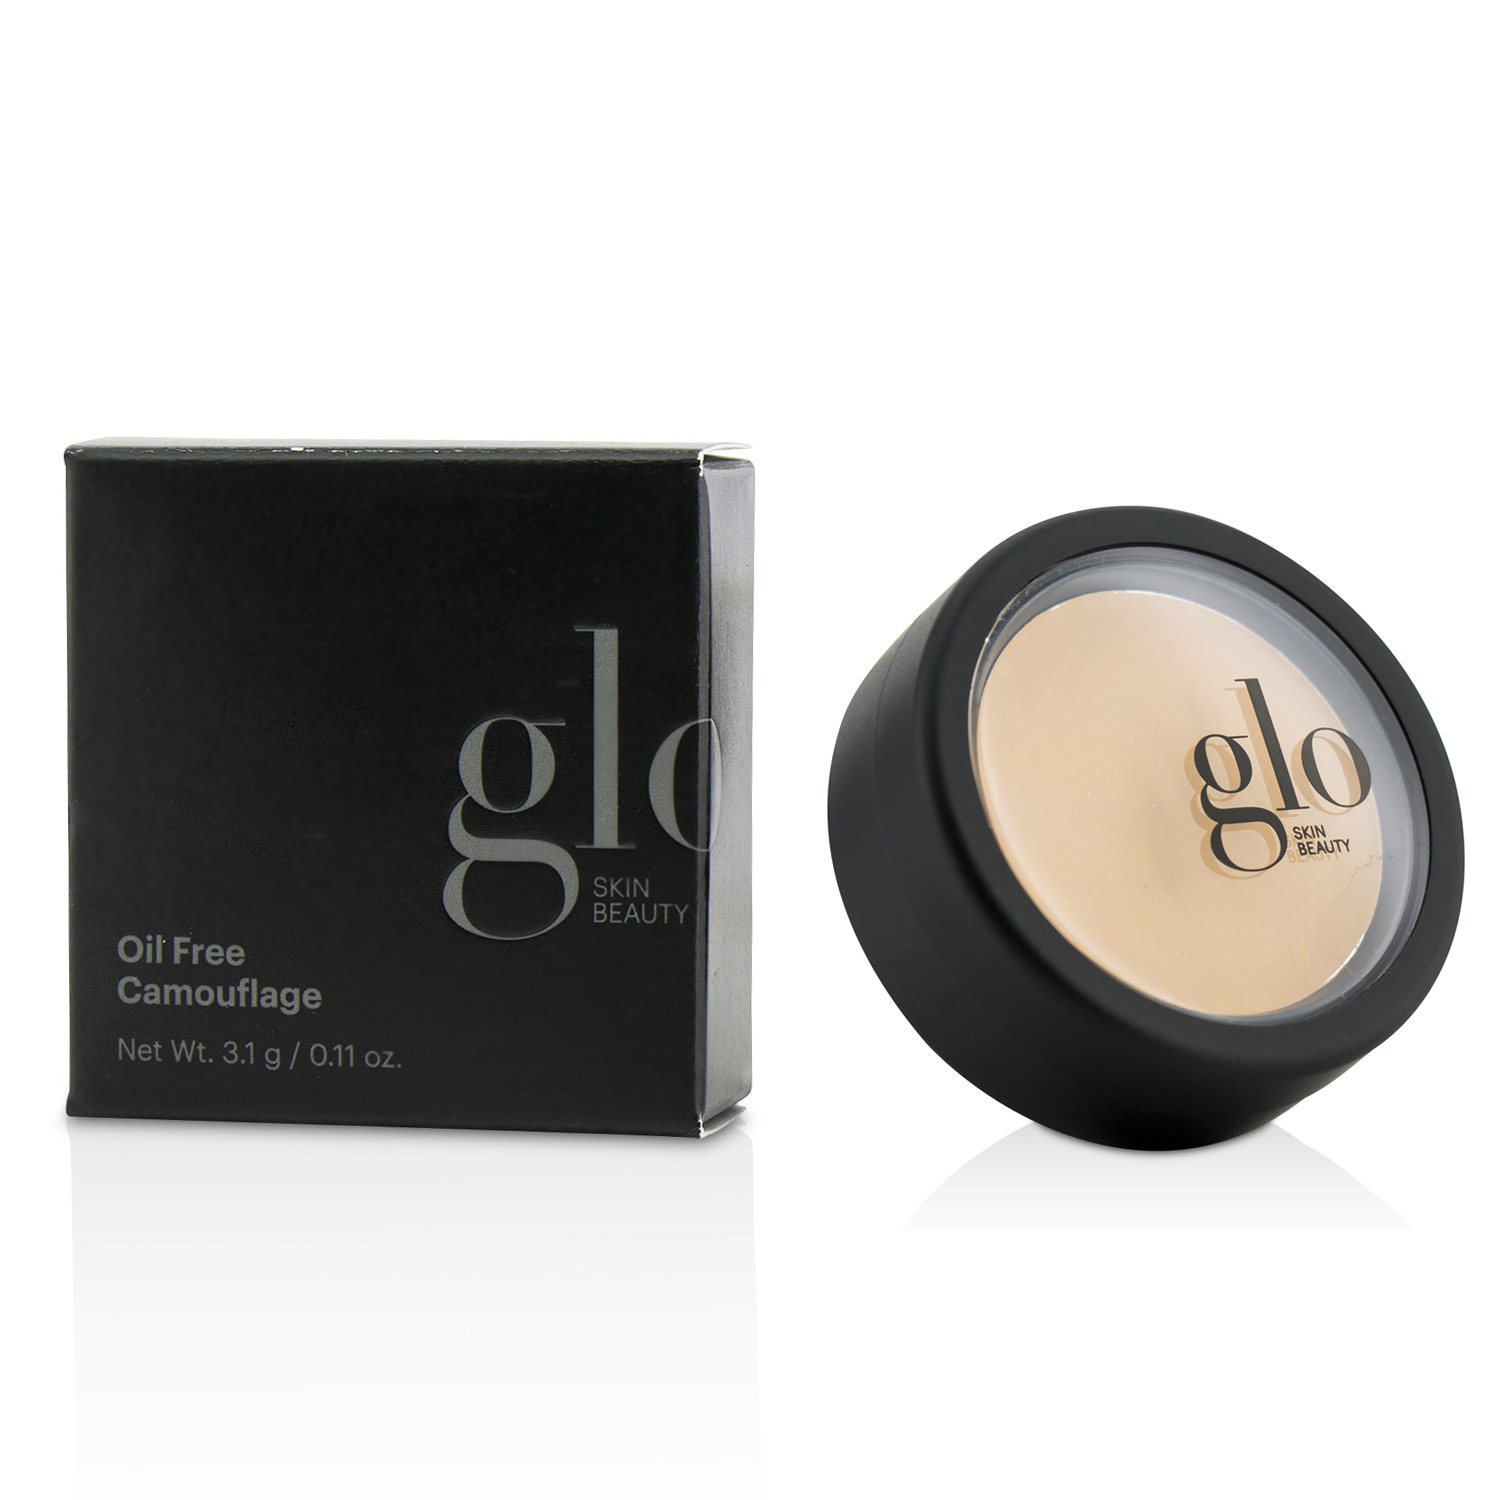 Oil Free Camouflage - # Natural Glo Skin Beauty Image